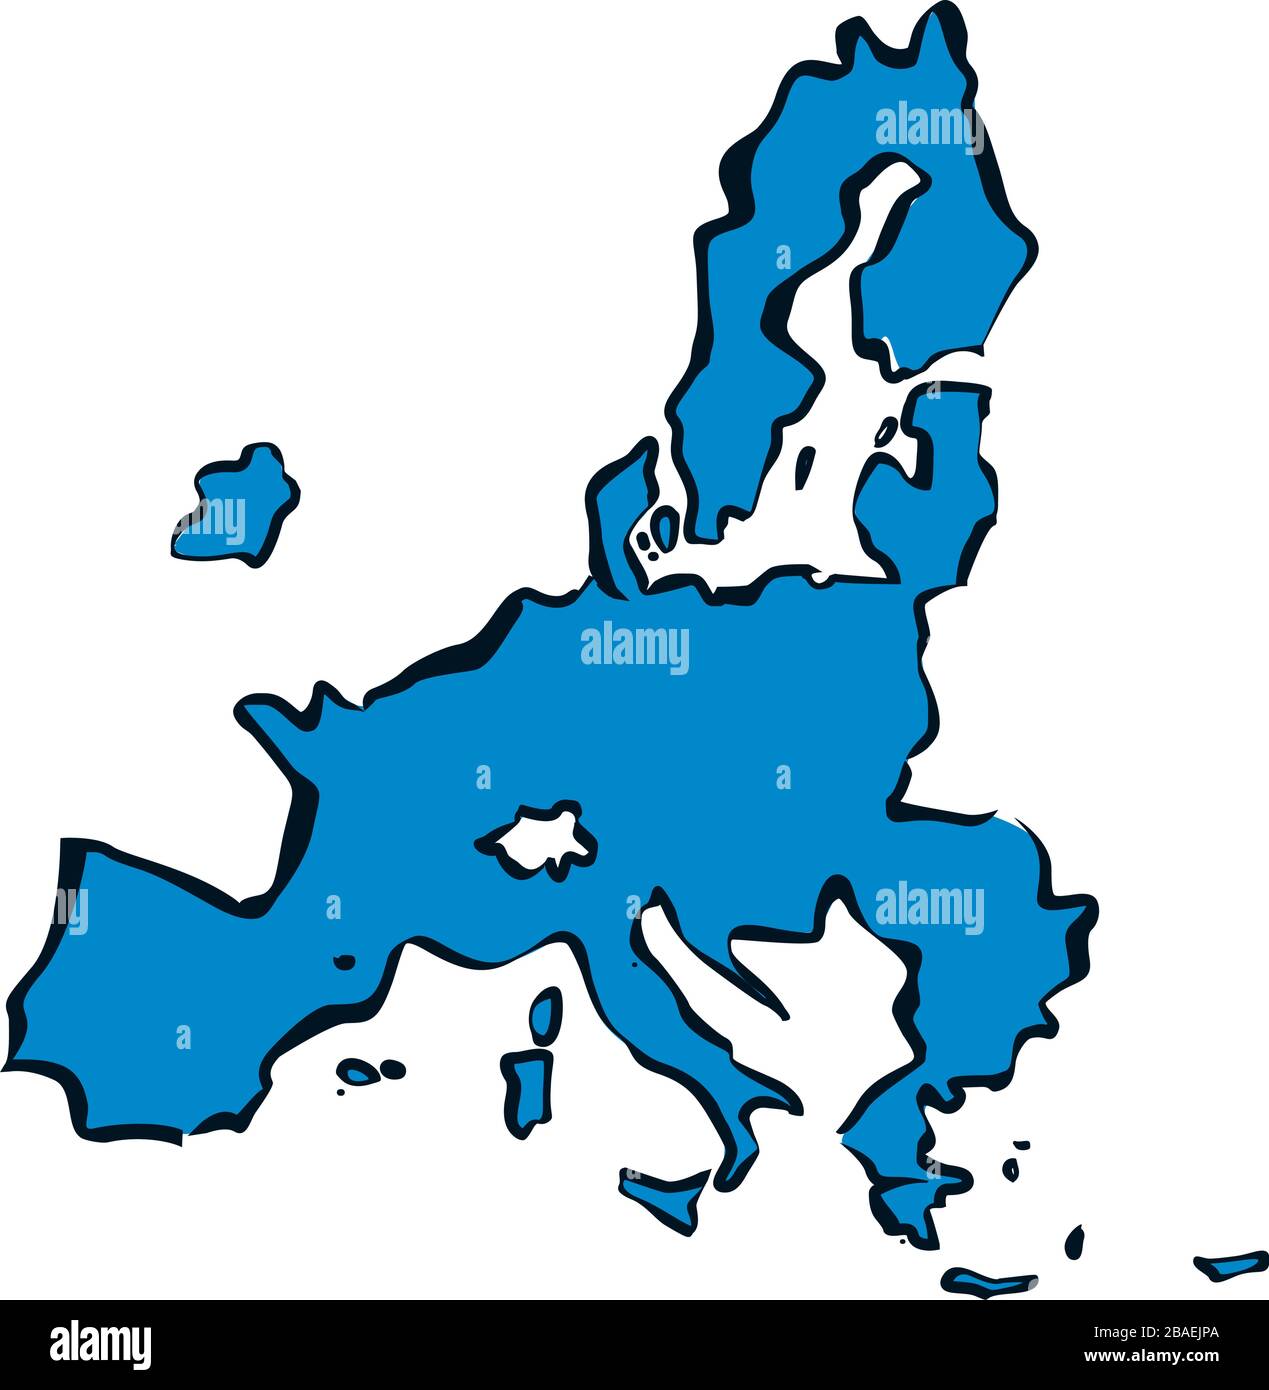 New Map of European Union and Brussels. Blue Vector Illustration. Stock Vector